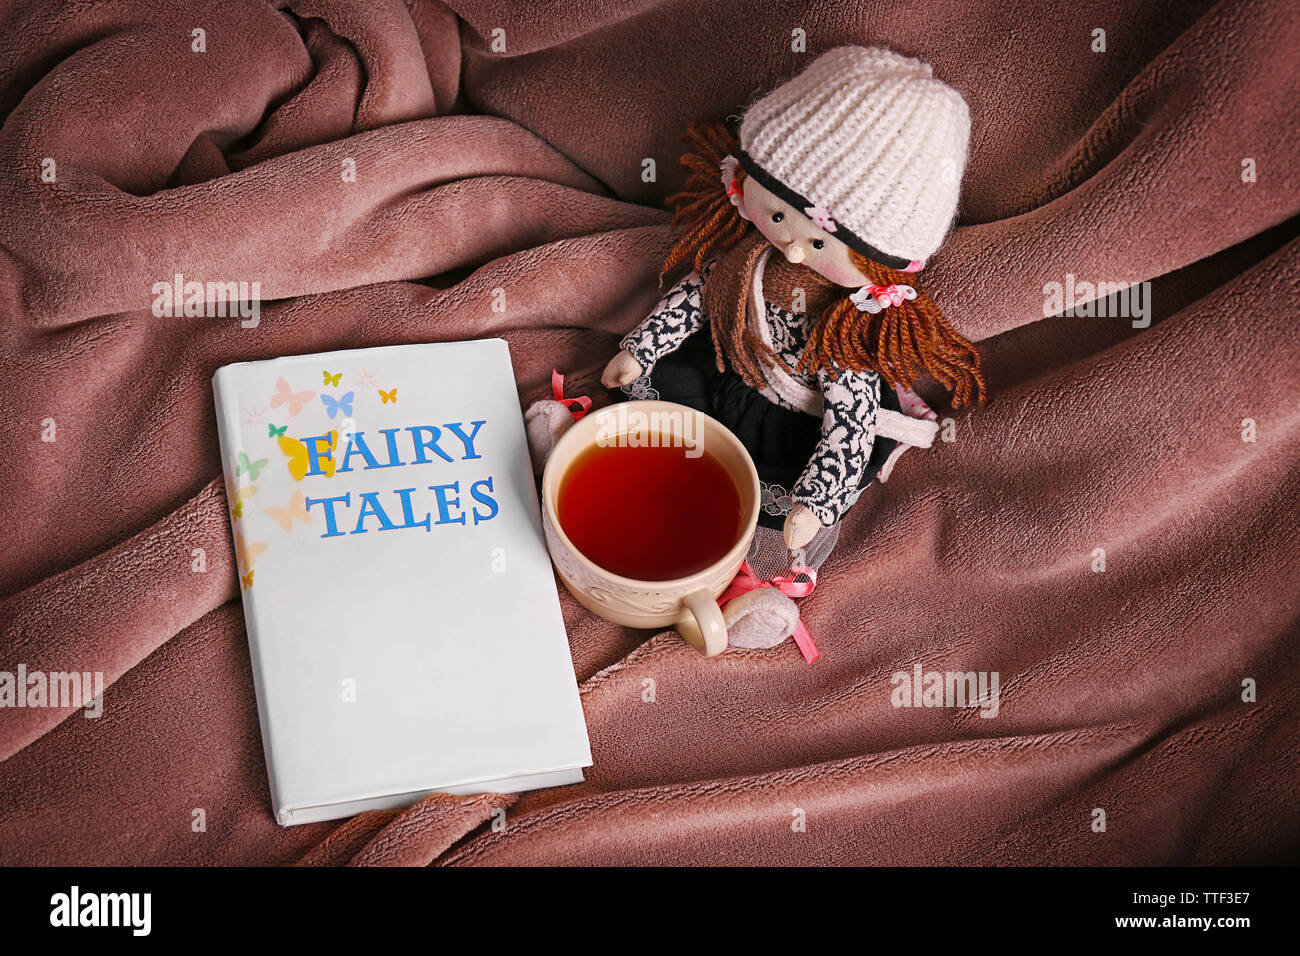 Rag doll with fairy tales book  and cup of tea on bedspread. Childhood concept Stock Photo